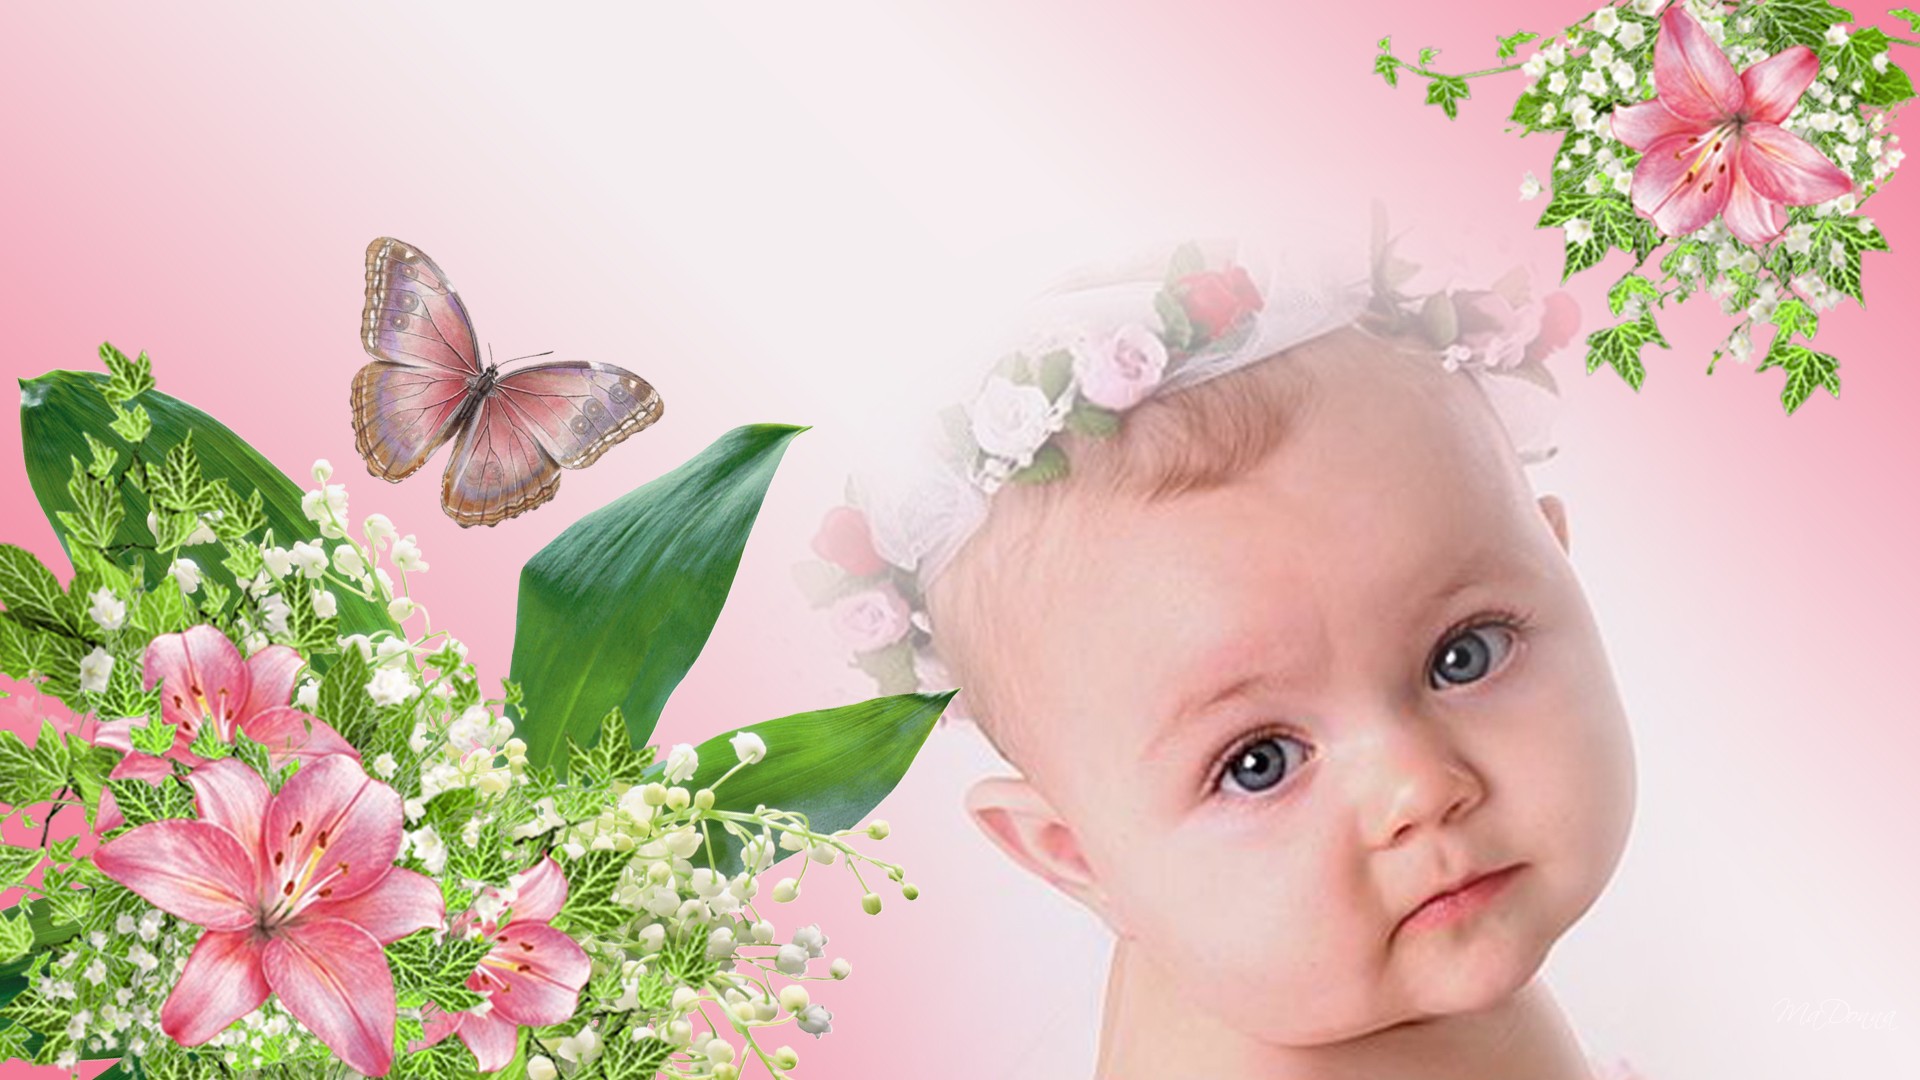 Image Of A Baby HD Wallpaper